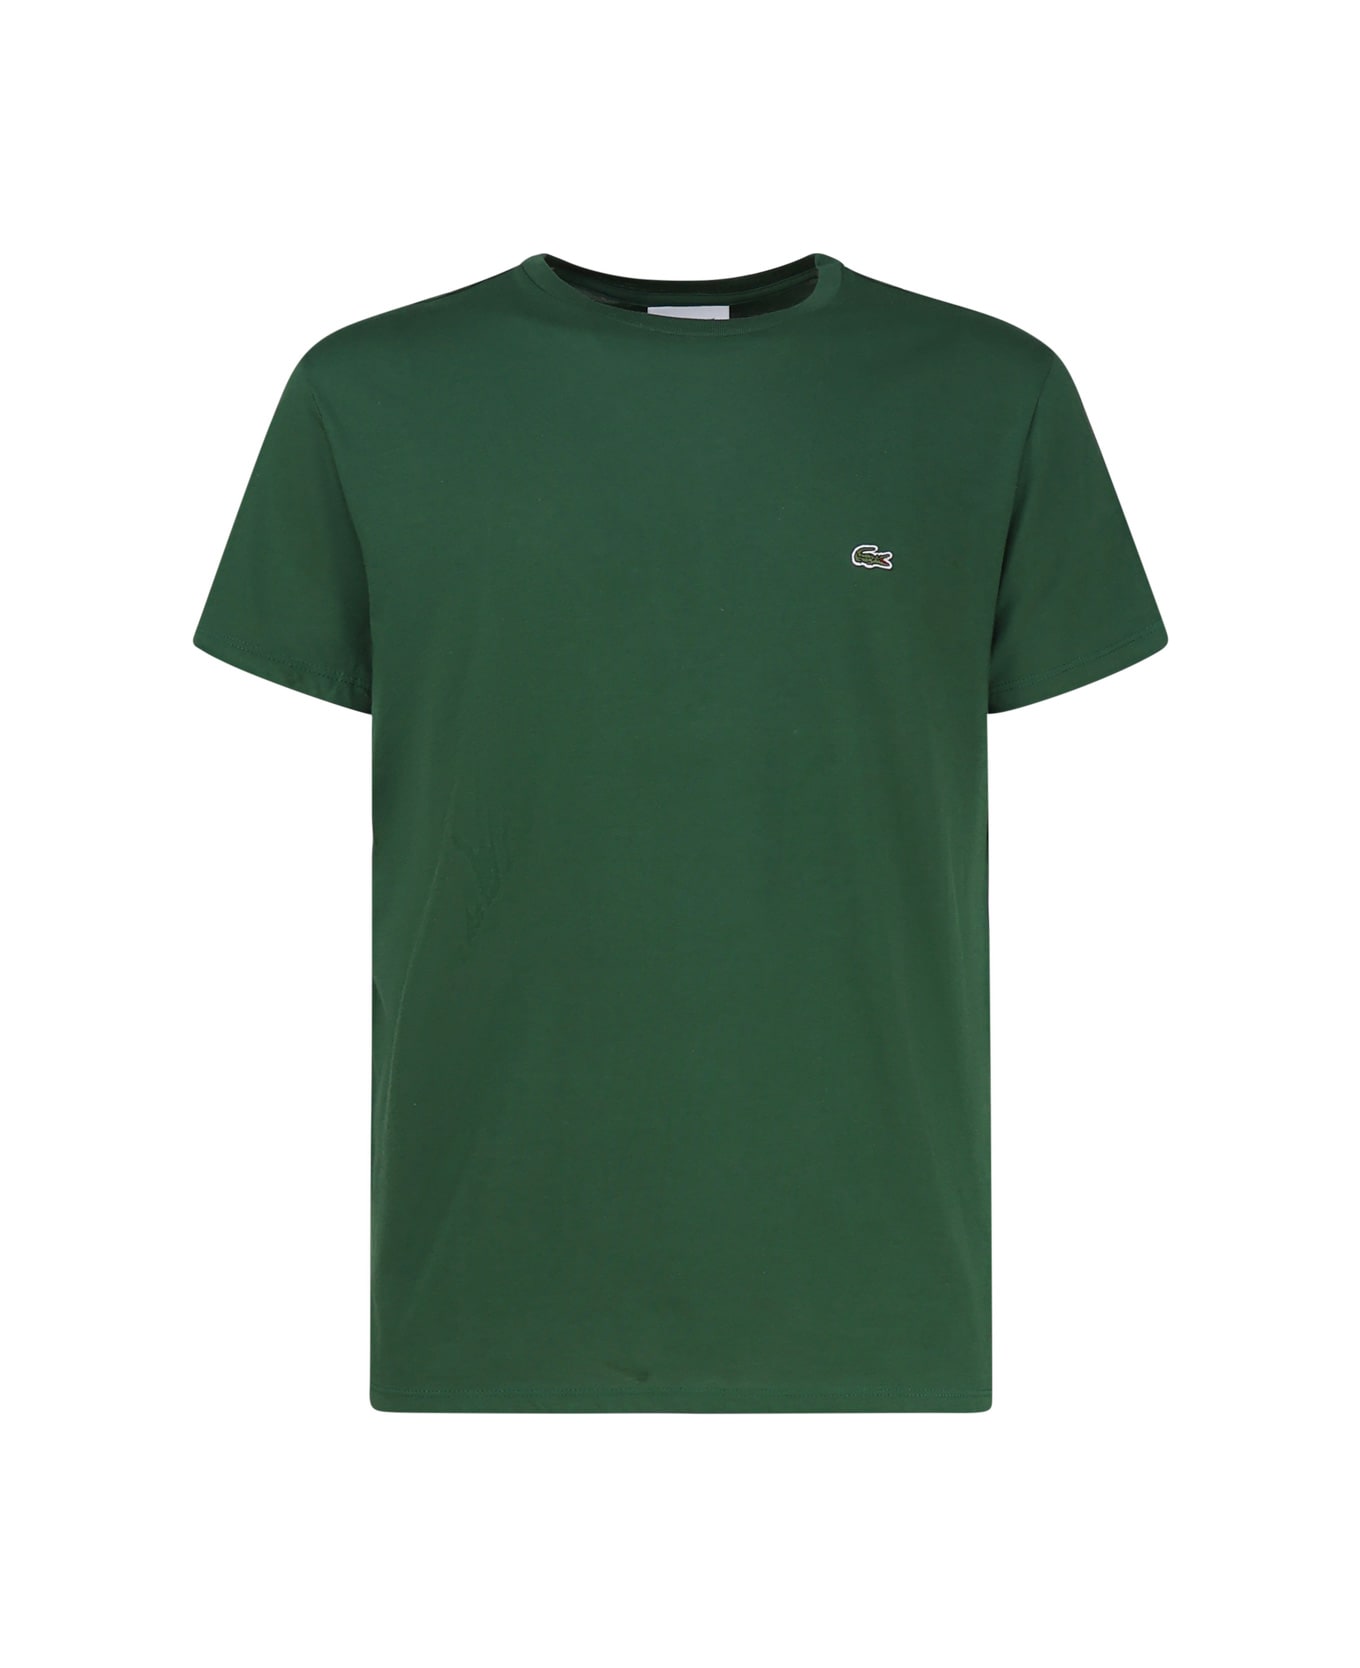 Lacoste Green T-shirt In Cotton Jersey - Verde シャツ